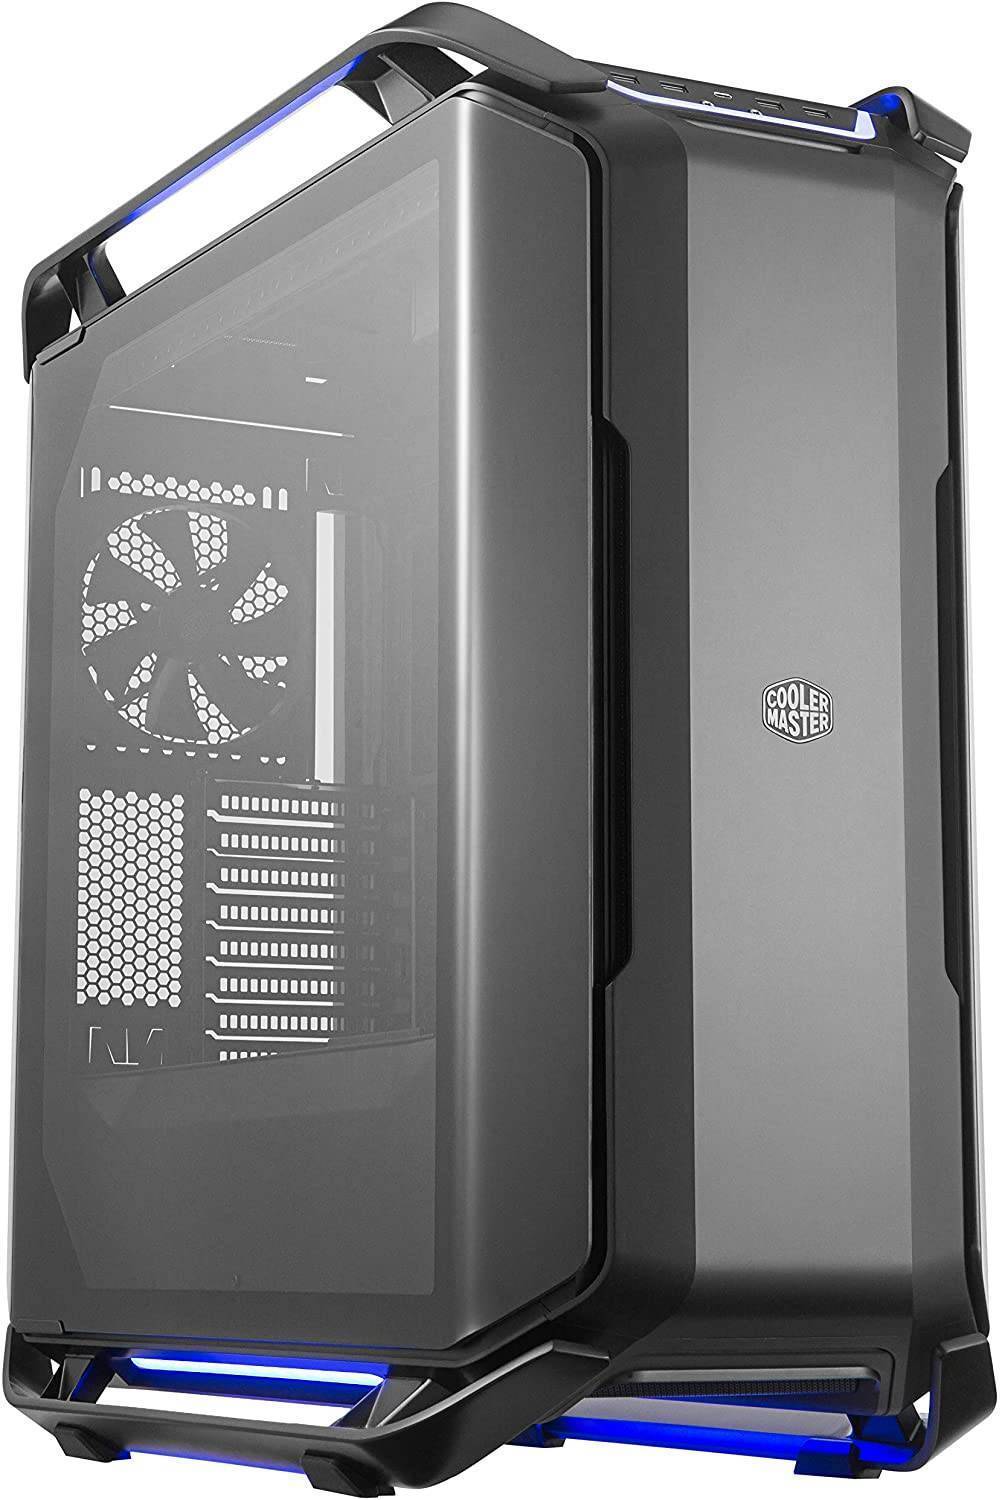 Cooler Master Cosmos C700p Black Edition Include The Psu Shroud And An Extra Rear Panel